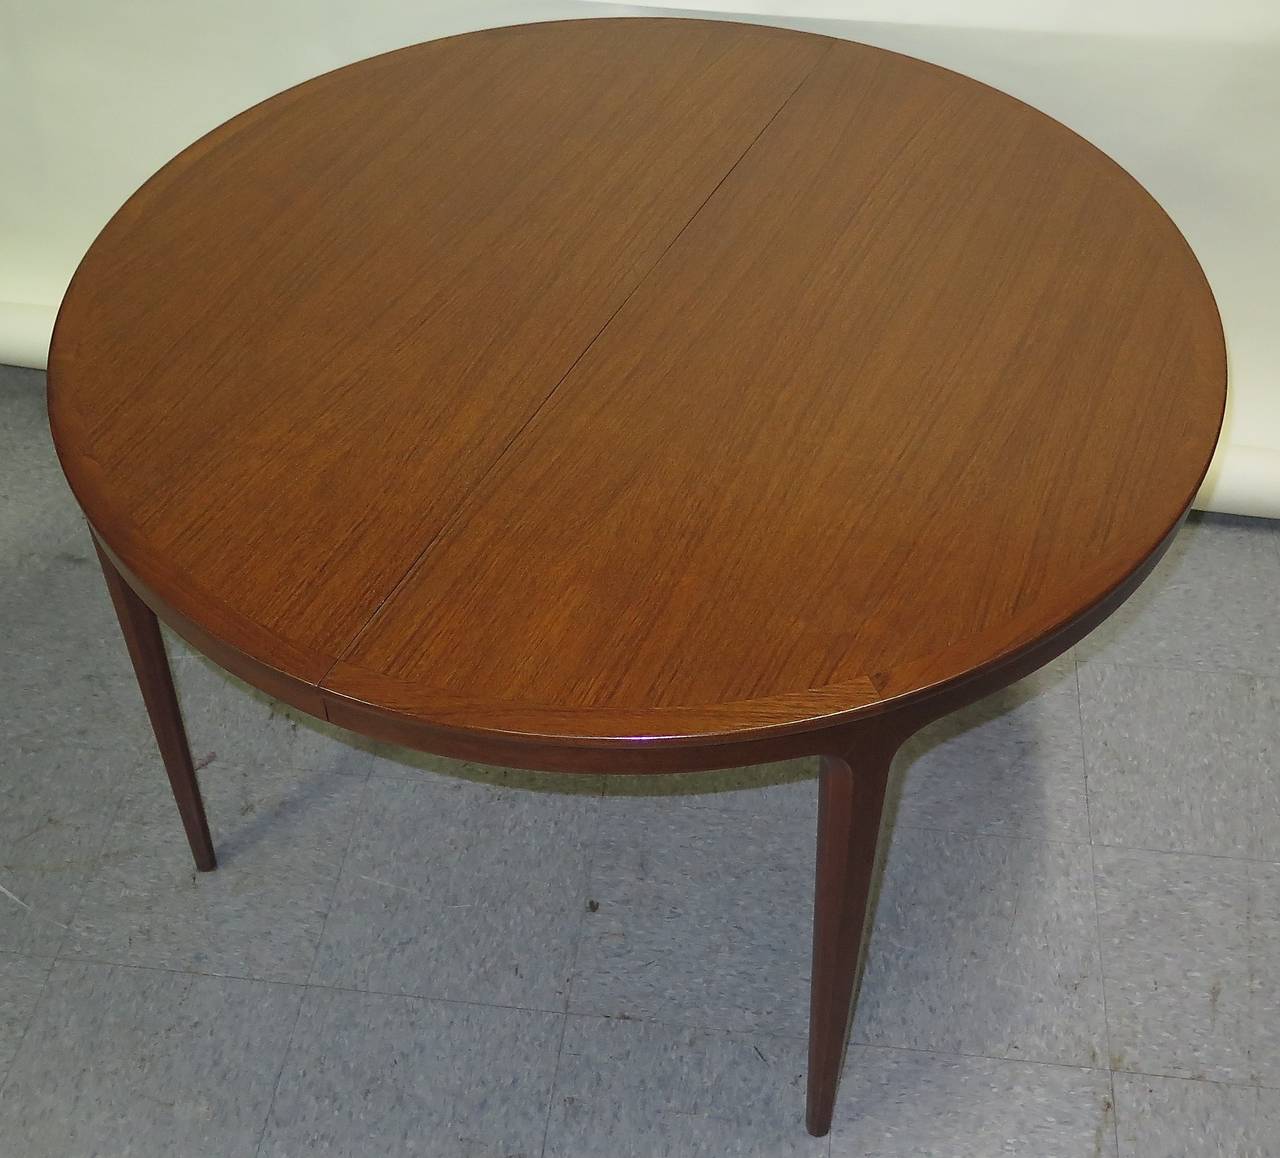 Restored. Teak. Nice leg design. Few scuffs and nicks under new surface. Without leaves measures 45.25 in. round x 28.25 in. high. Each leaf measures 21 5/8 in. W. When all four leaves are in a pair of legs in center drop down. Total of 130